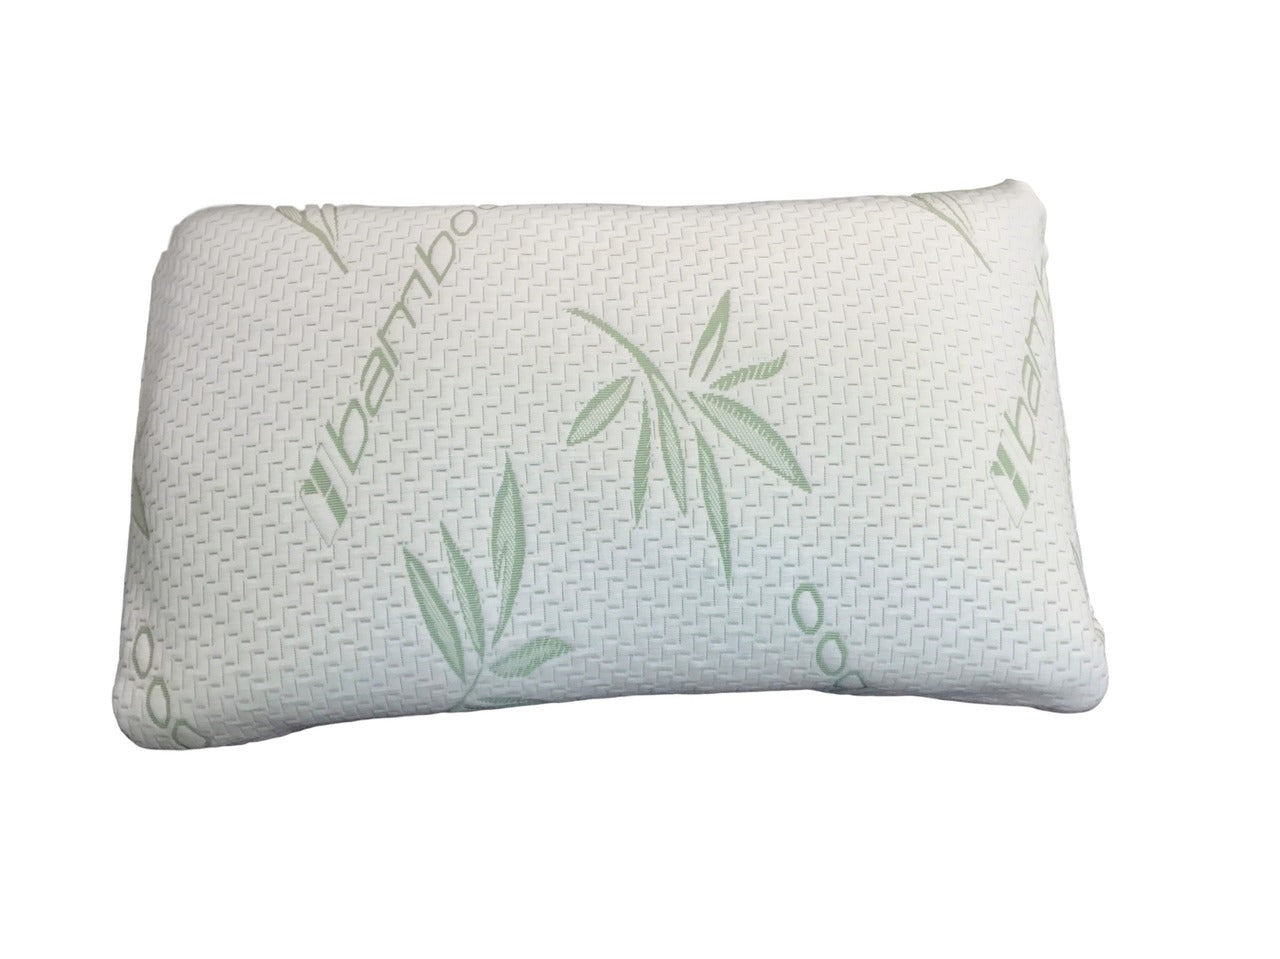 ViscoLogic Luxury Shredded Memory Foam Pillow (Never compressed) Queen